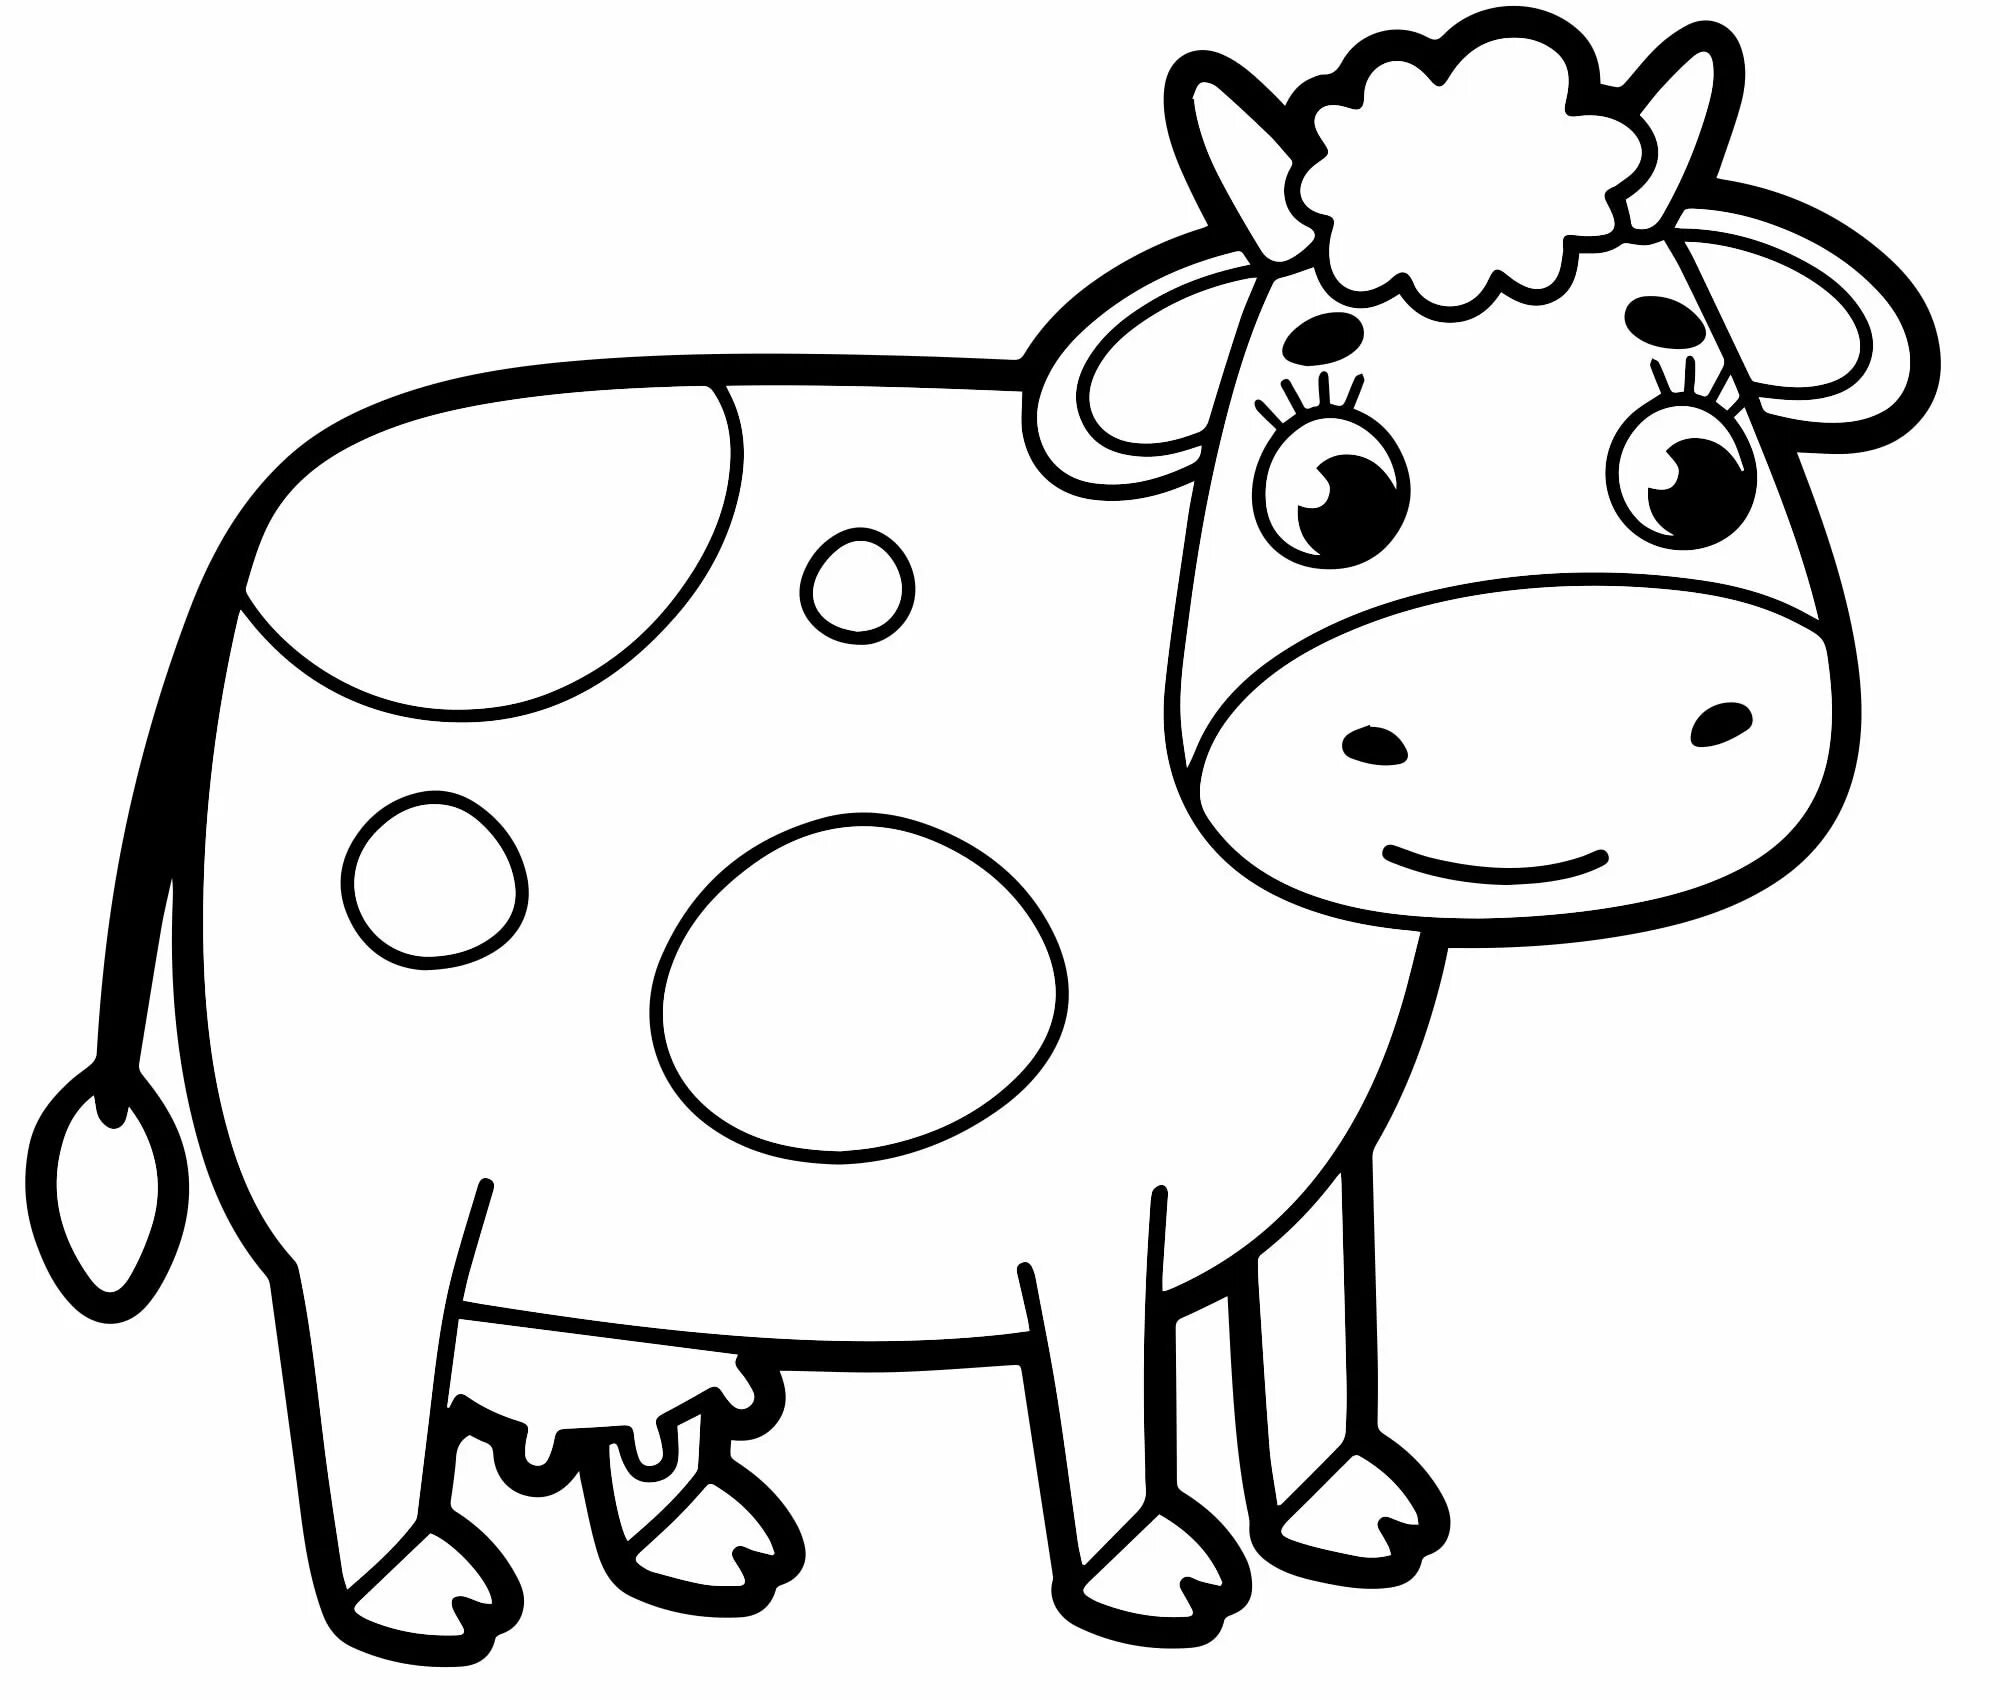 Cow for kids #17